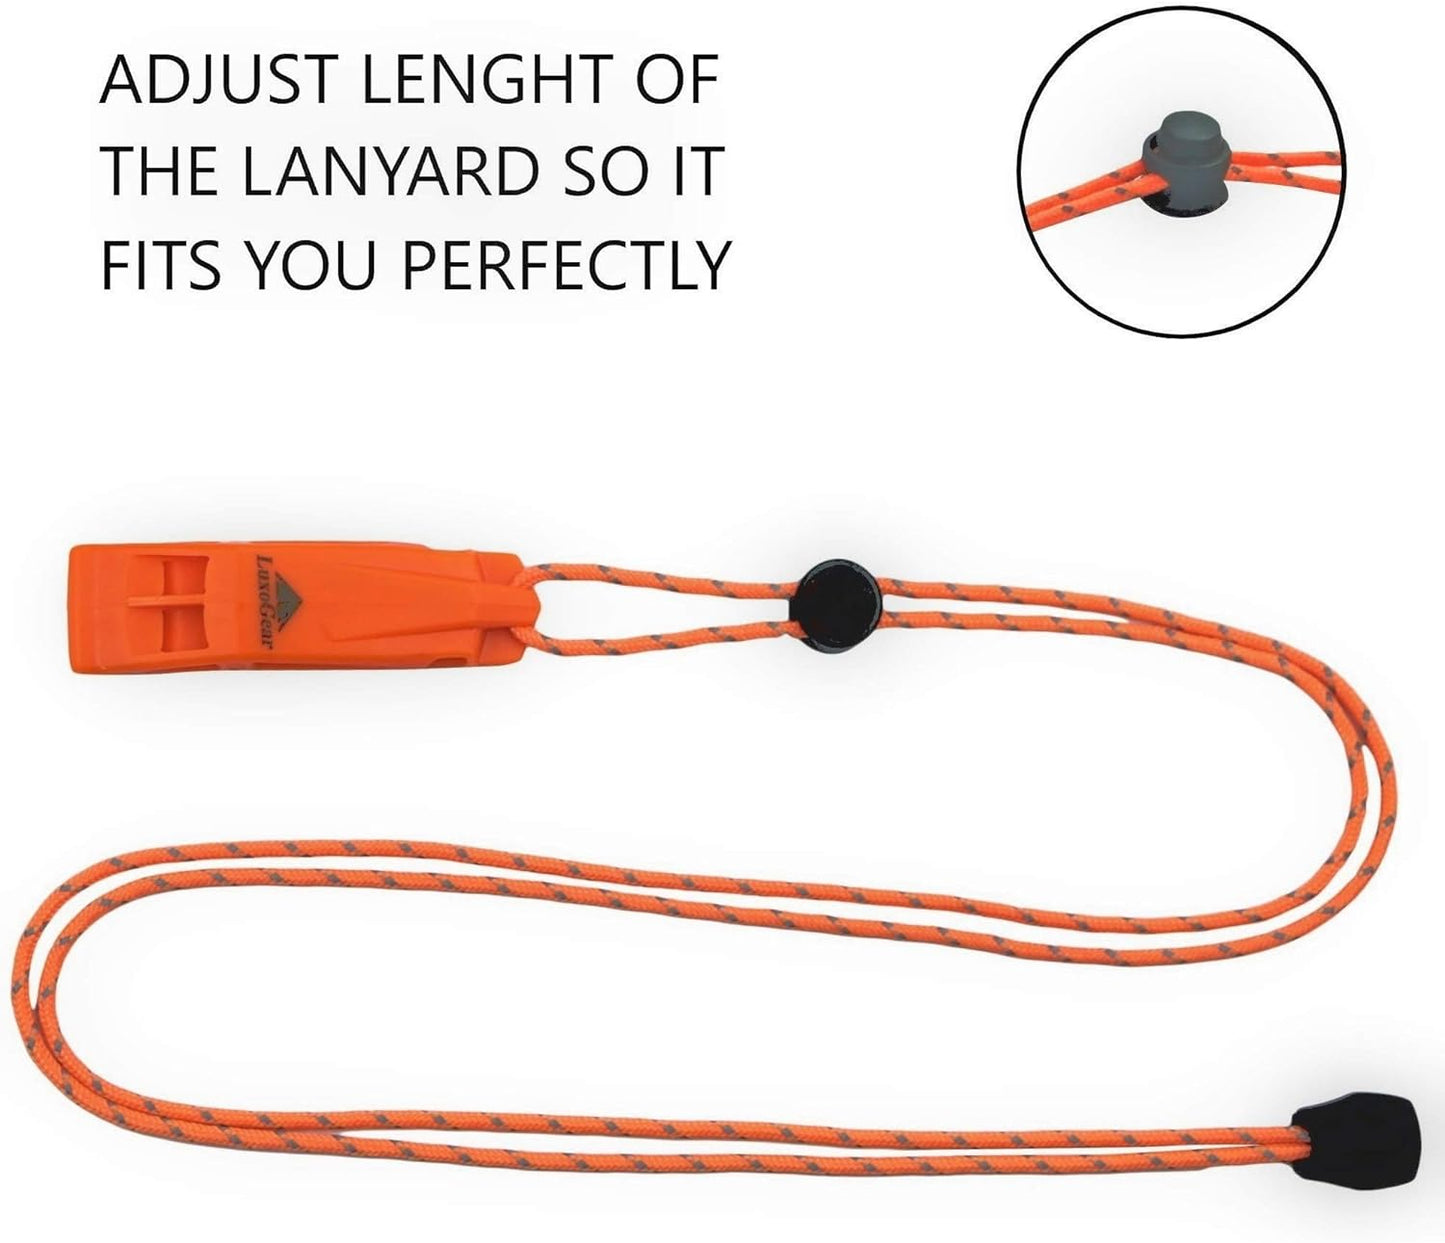 Emergency Whistles with Lanyard Safety Whistle Survival Shrill Loud Blast for Kayak Life Vest Jacket Boating Fishing Boat Camping Hiking Hunting Rescue Signaling Kids Lifeguard Plastic 2 Pack